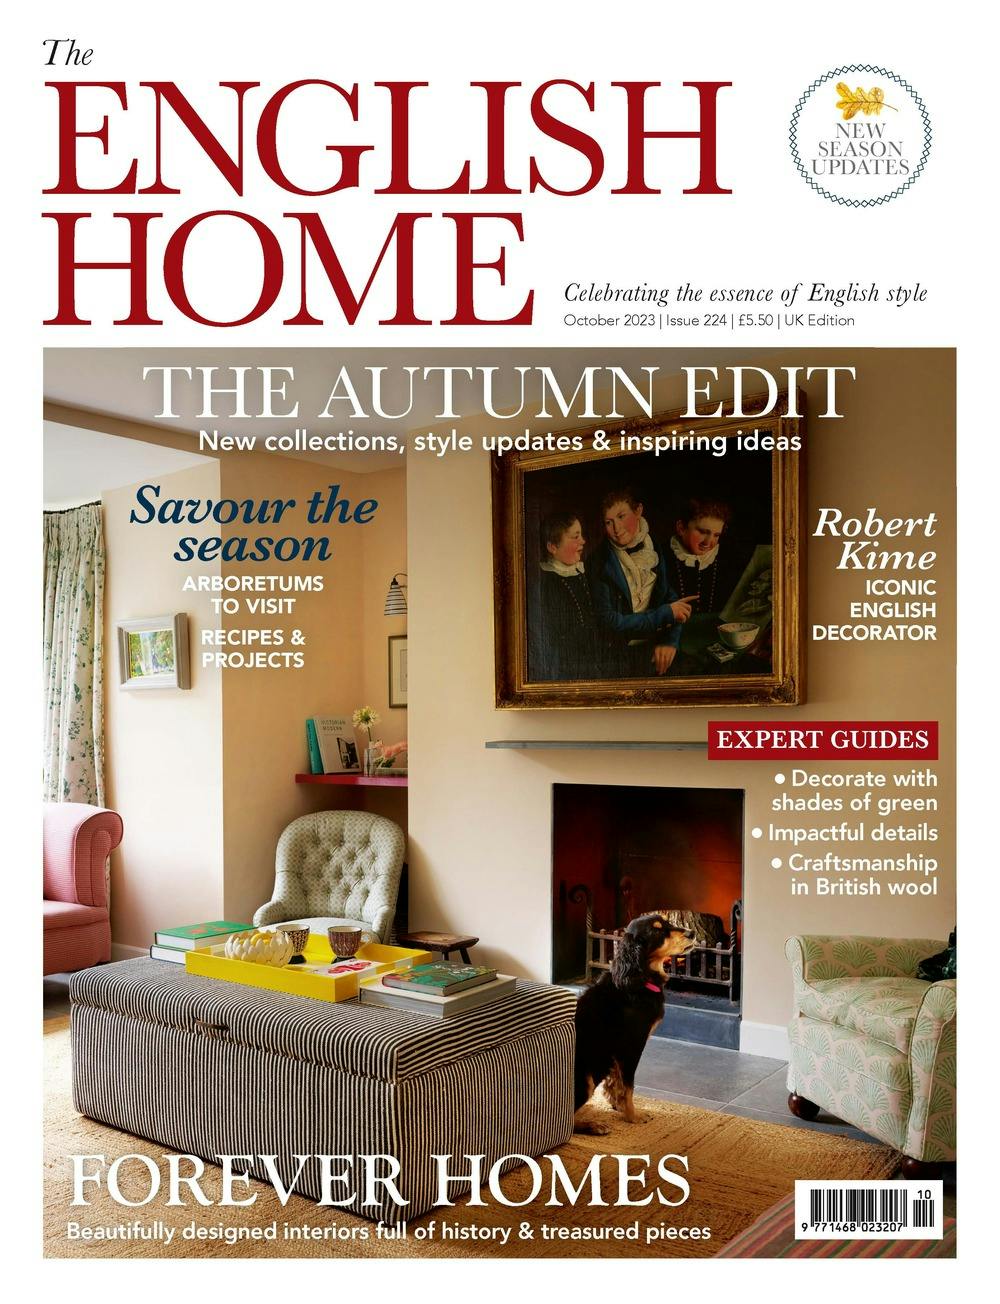 The English Home magazine front cover